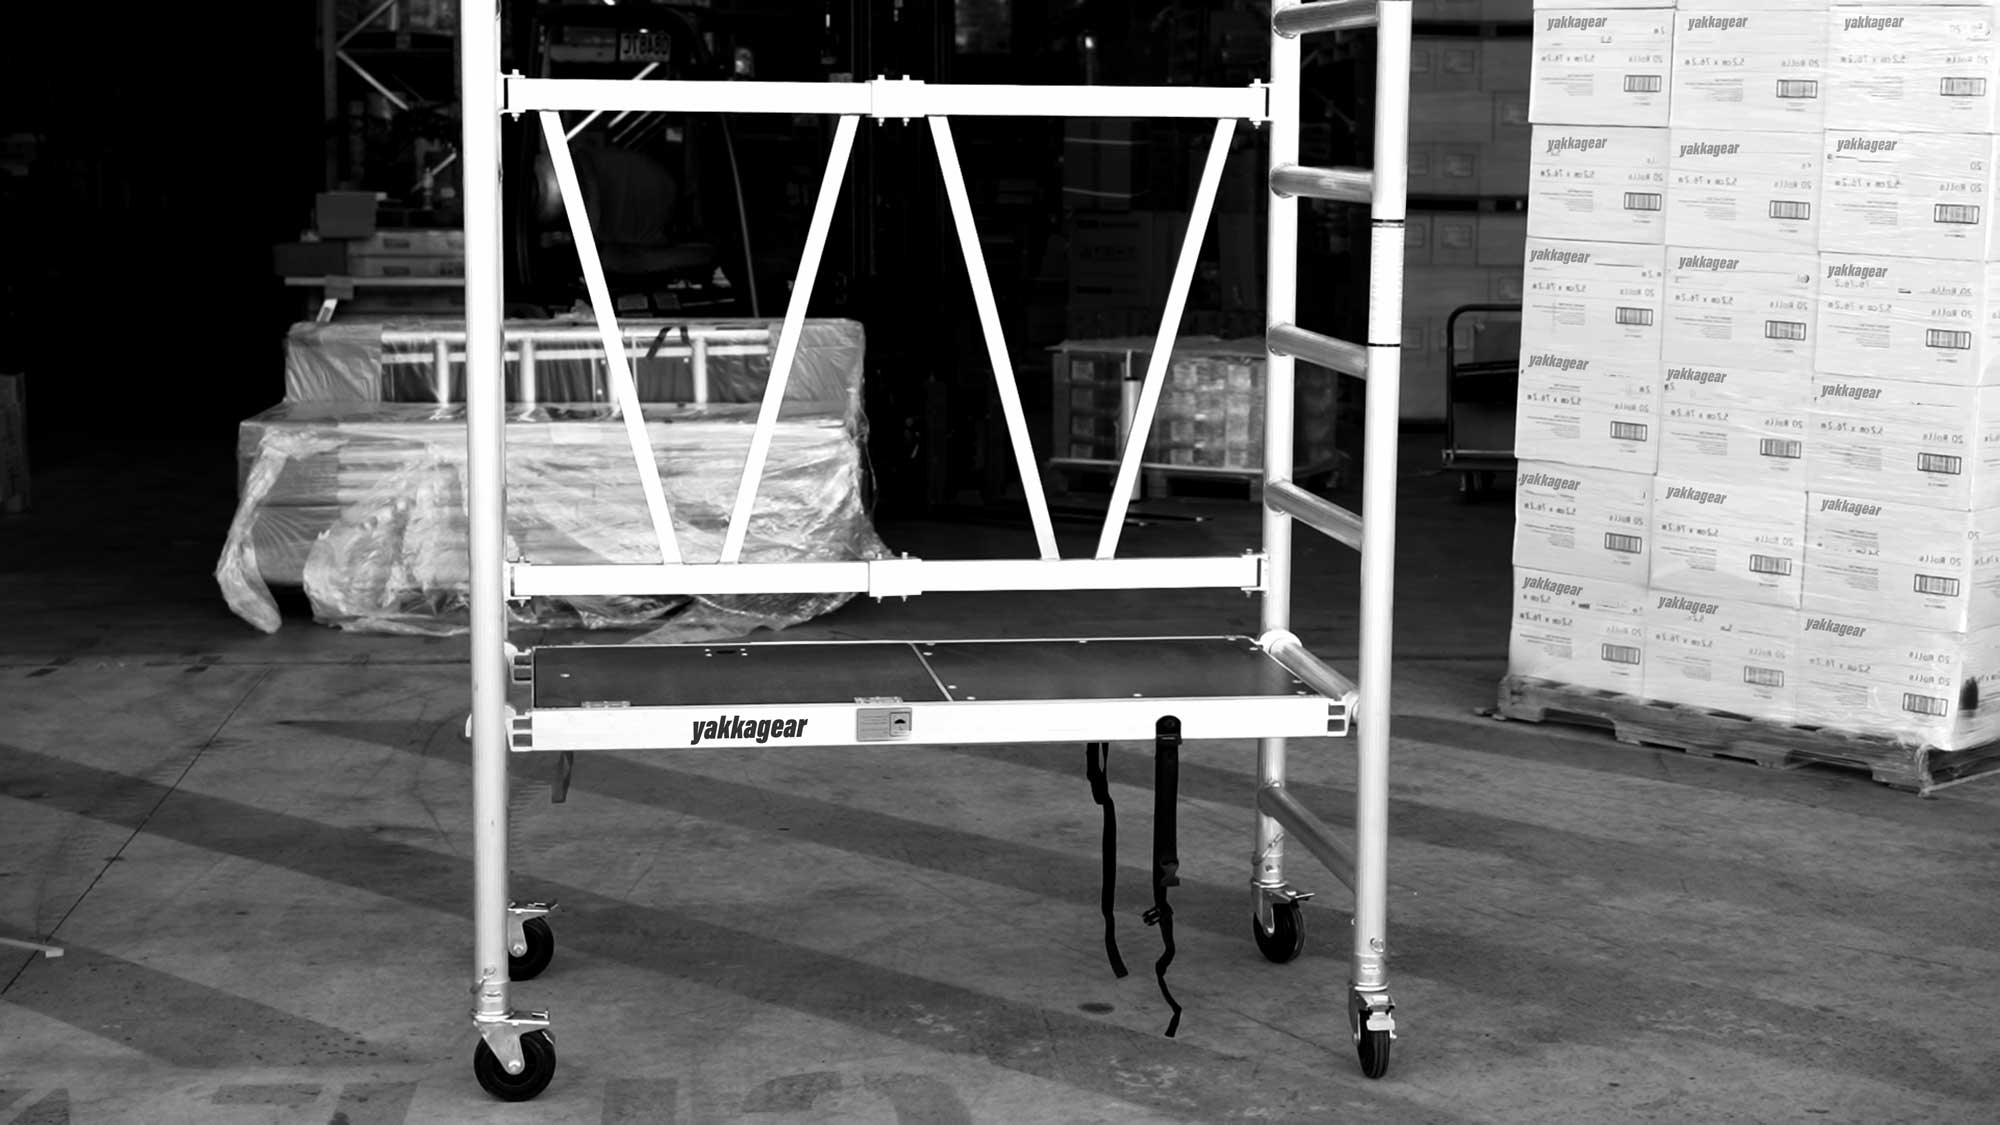 Yakka Gear Australia Base Unit, 1.44m Length x 0.74m Width, with working platform height of 1.2m and reach up to 3.25m high. View from the front side angle set up in the warehouse.